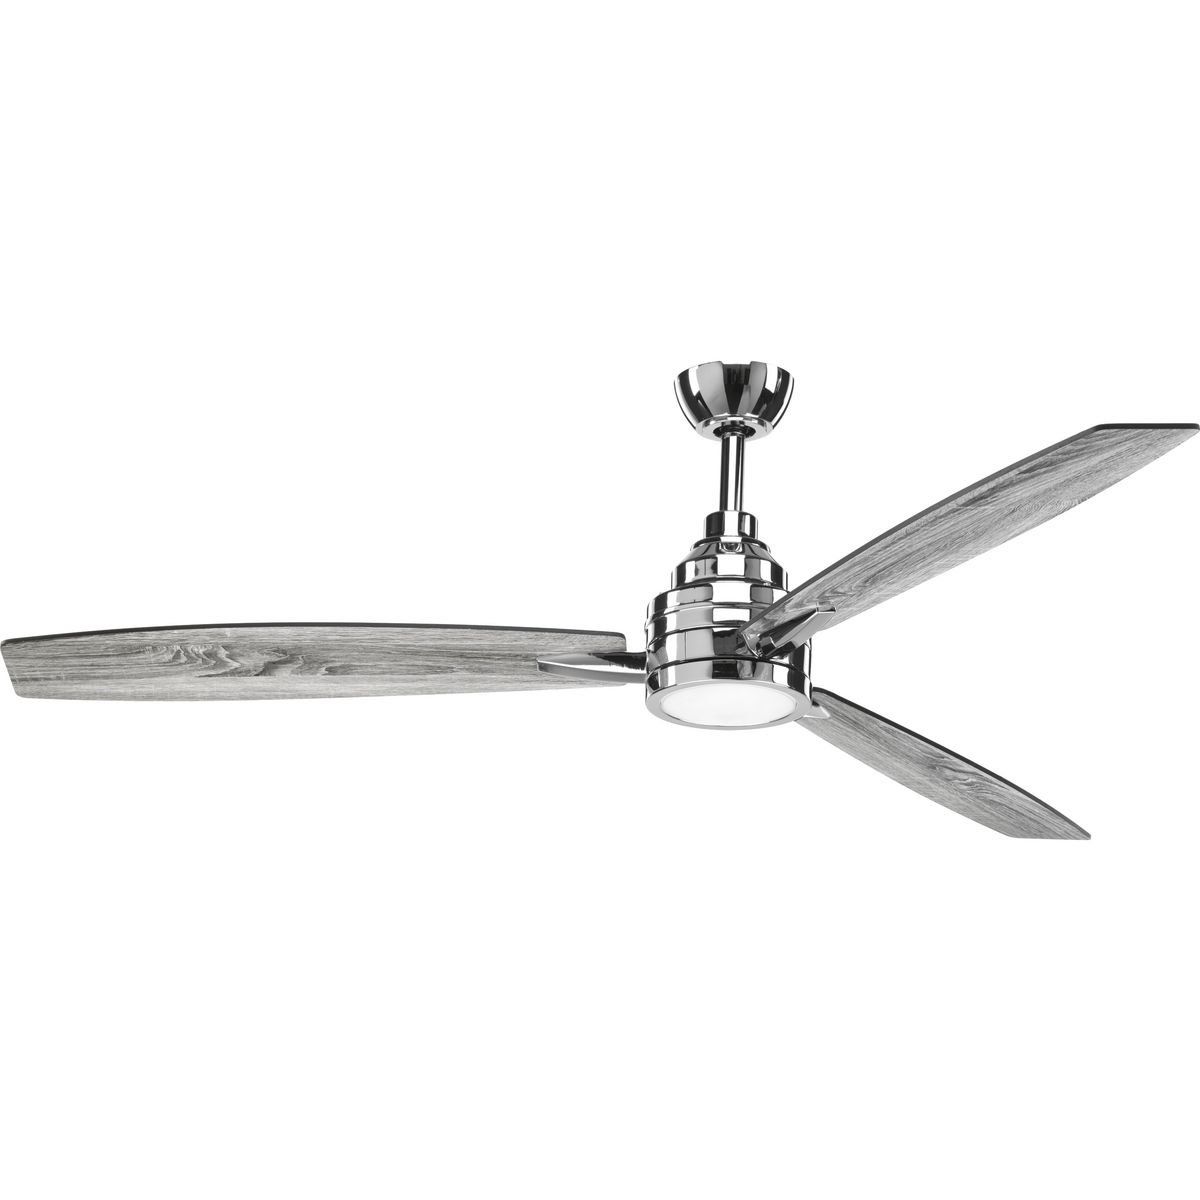 Bankston 8 Blade Led Ceiling Fans For Well Known 60" Troy 3 Blade Led Ceiling Fan With Remote, Light Kit Included (View 20 of 20)